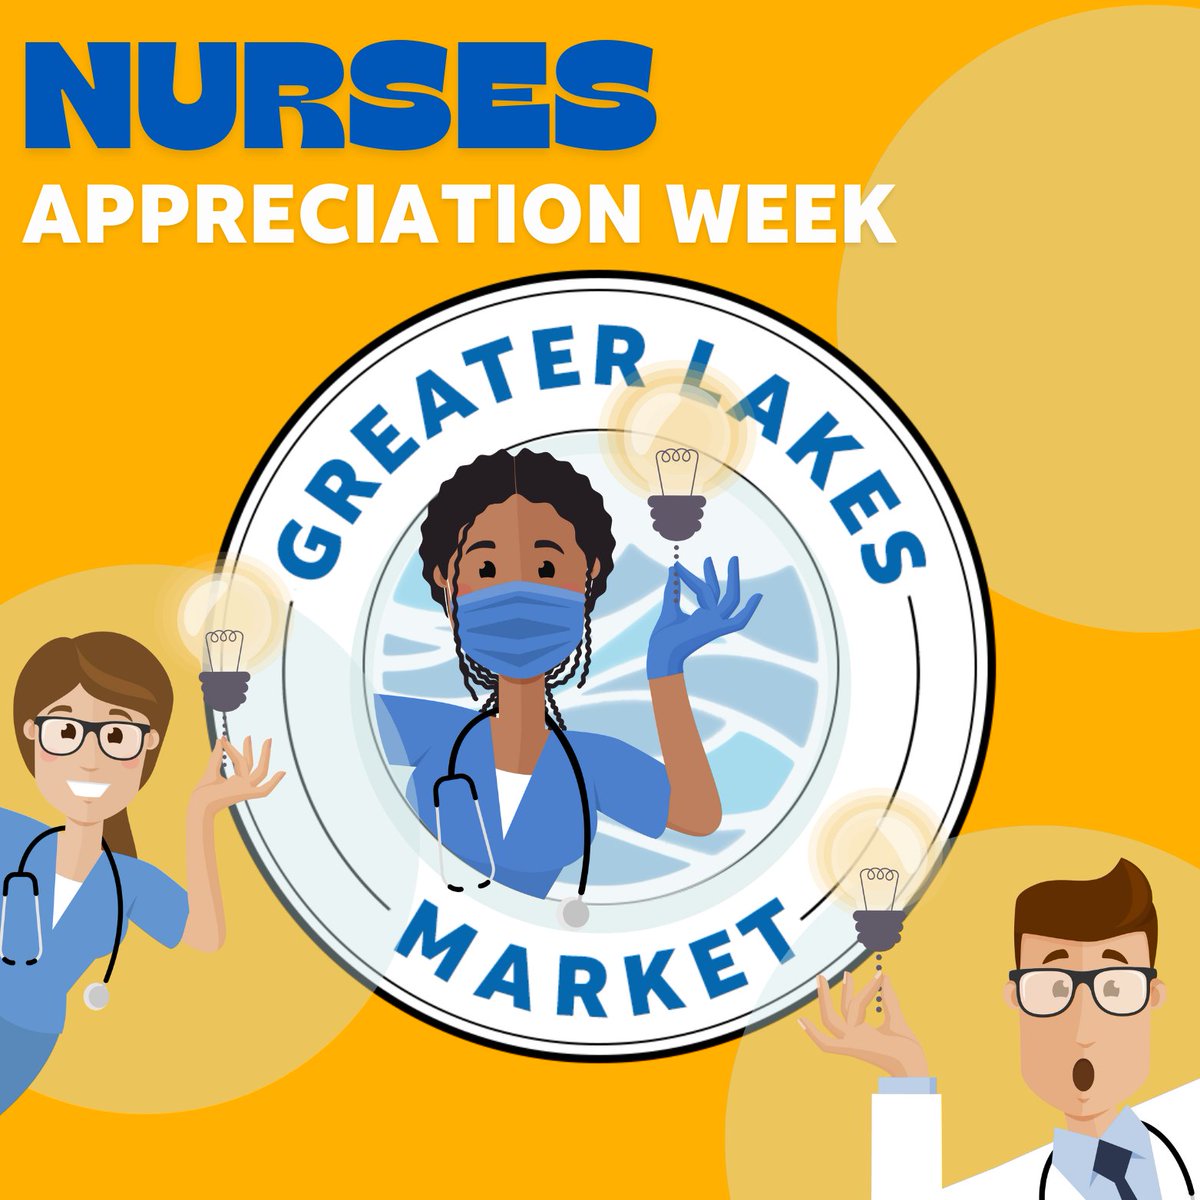 It's Nurses Appreciation Week! Here's to our everyday superheroes - thank you for all that you do! If you have a nurse in your life, check out this link to find some amazing discounts and freebies for 2024! nurse.org/articles/free-… #MakingHealthCareWaves 🫶🌊